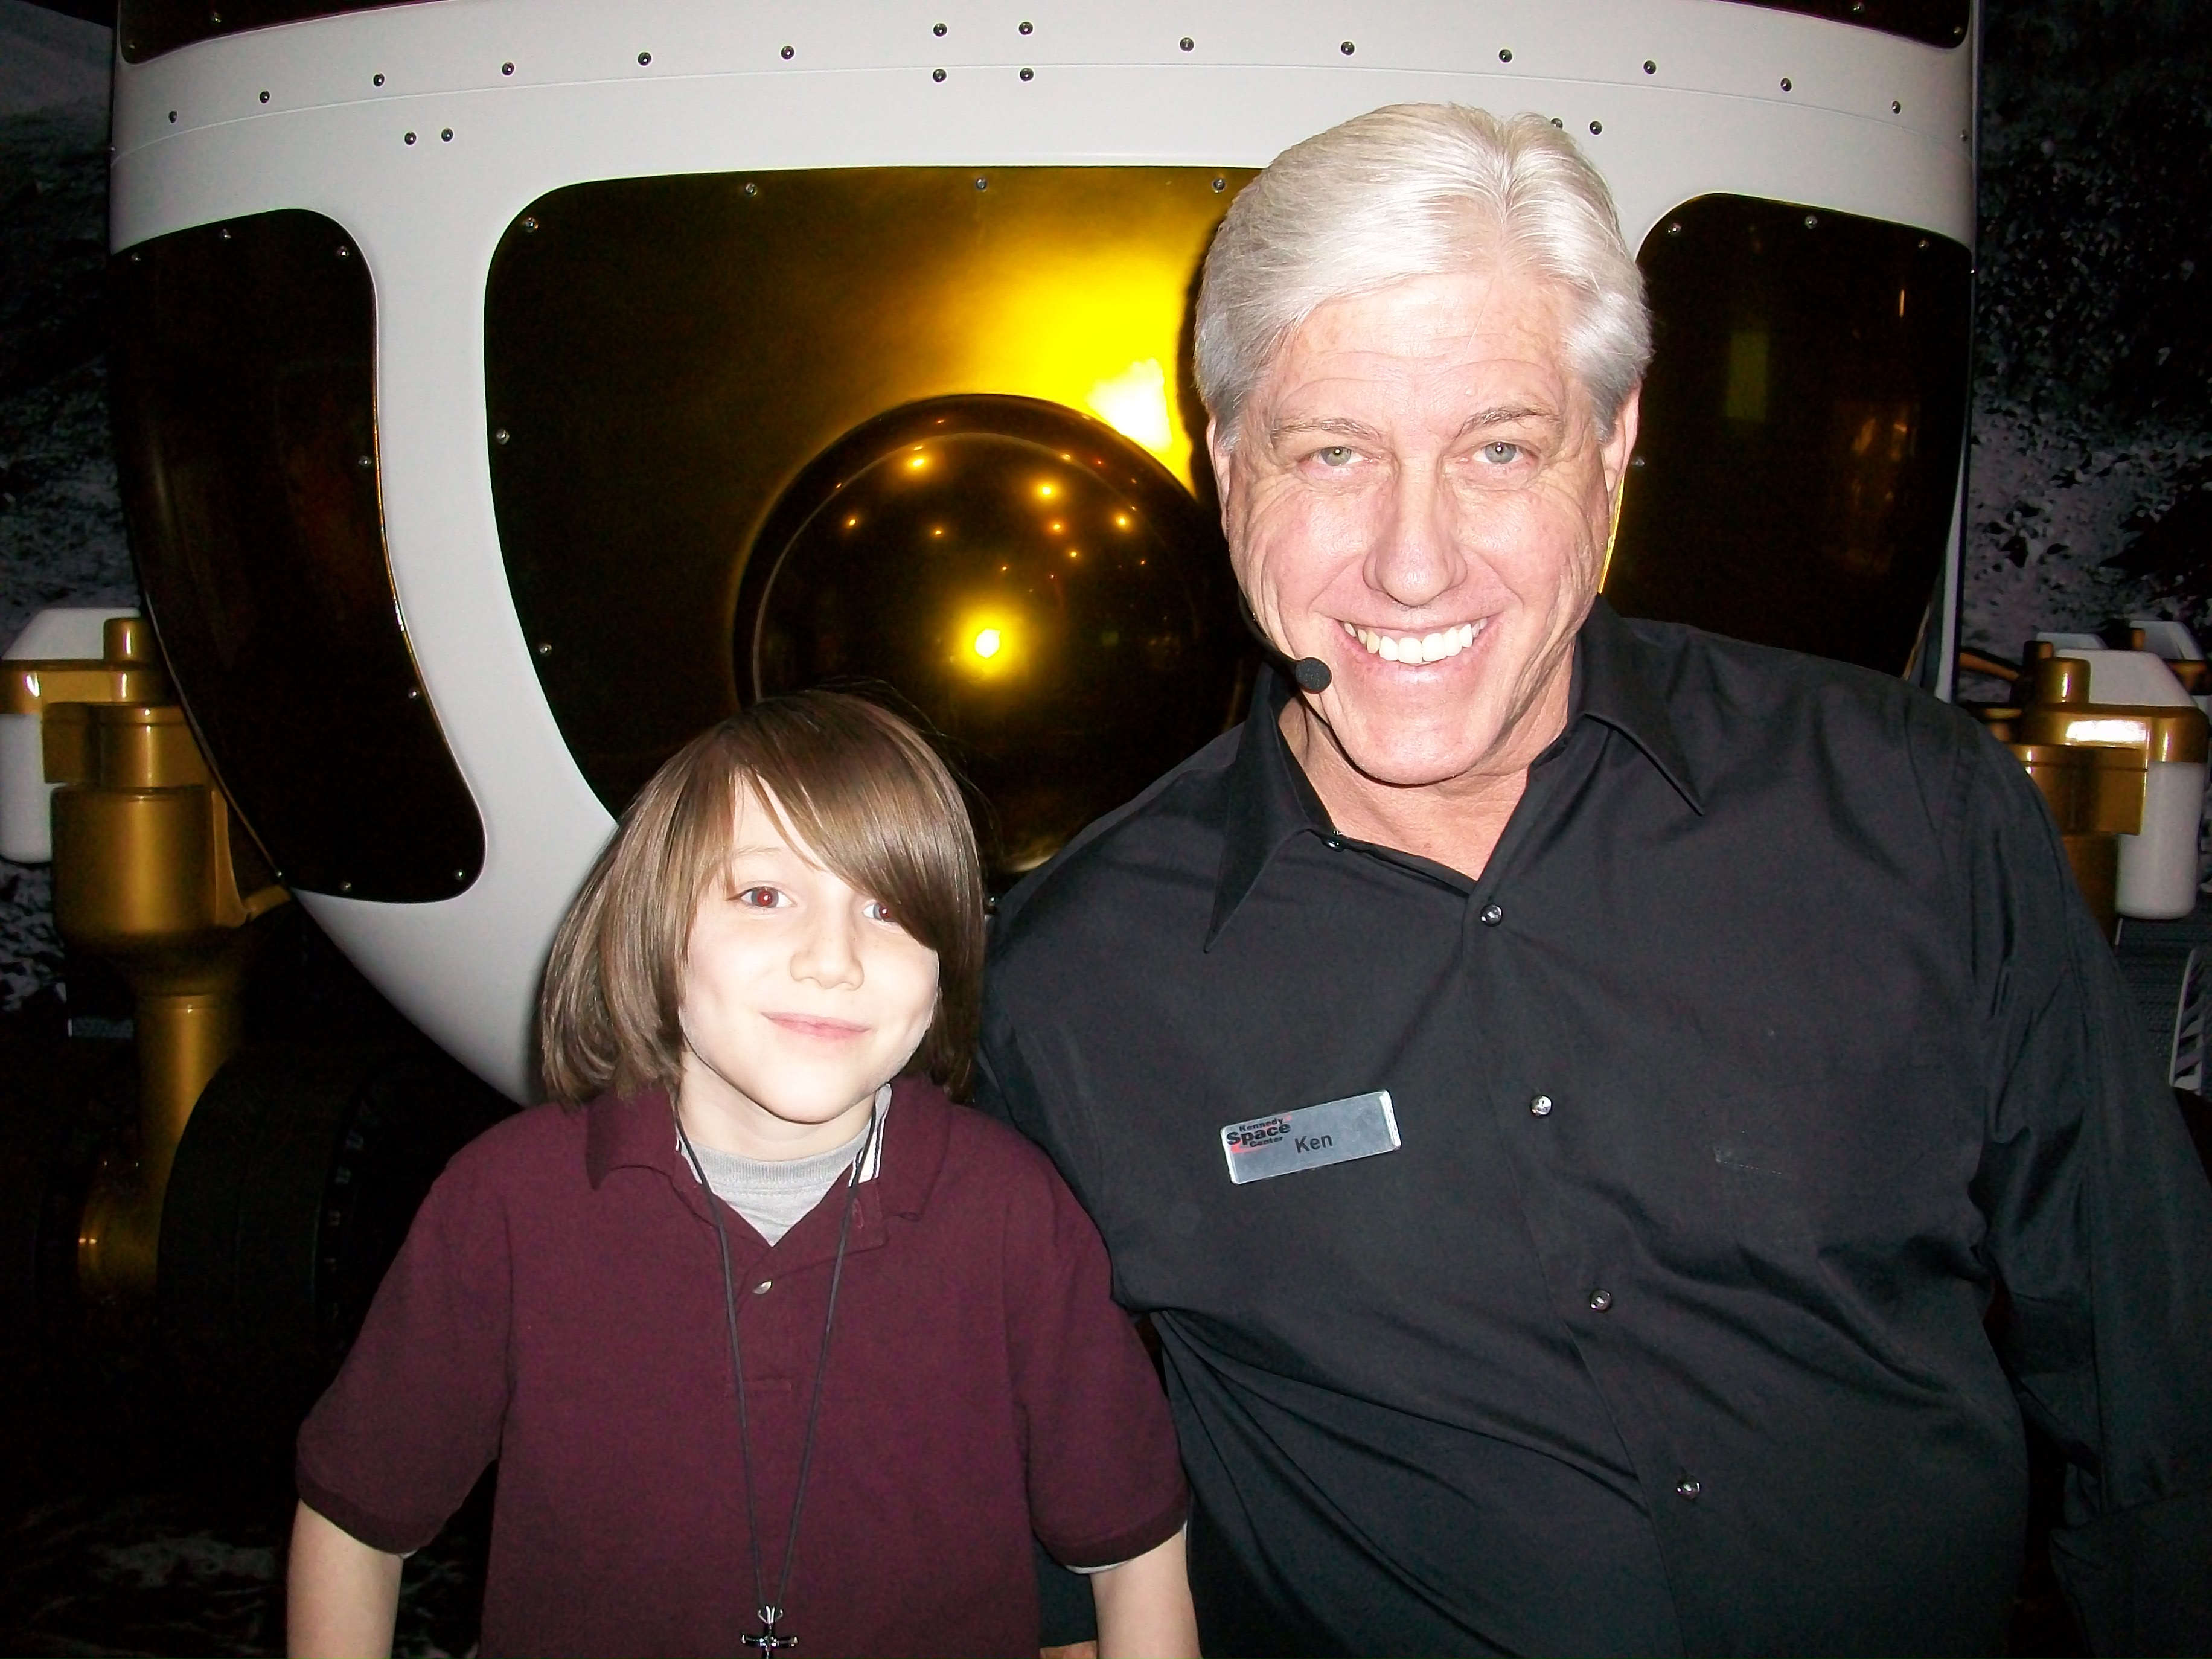 Gabriel with Ken on set of NASA for a Corporate Commercial Video Shoot